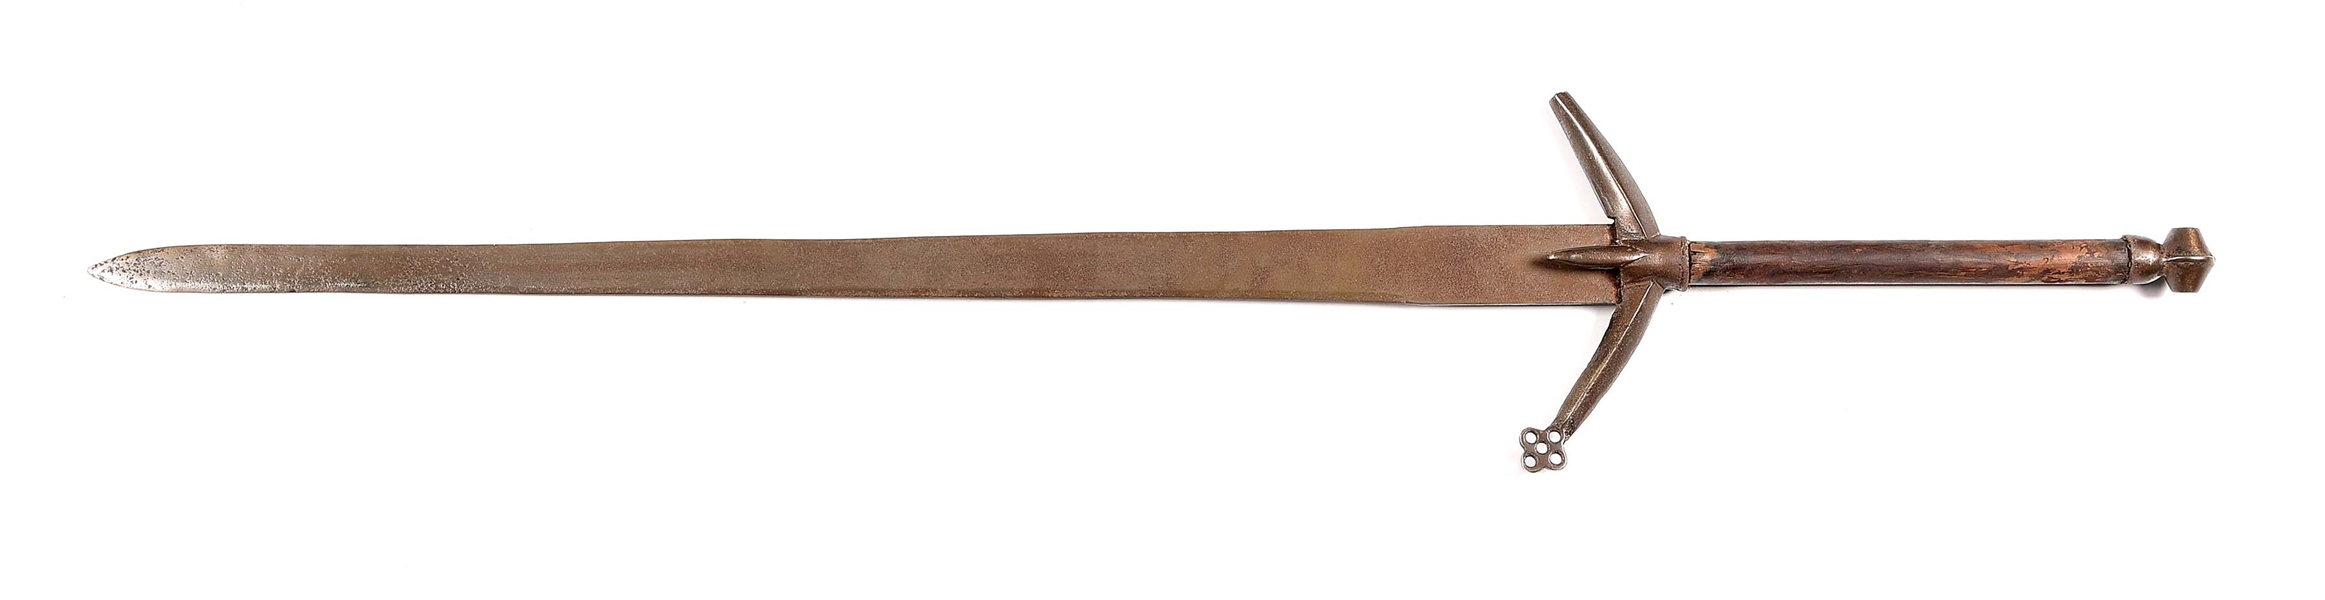 A SCOTTISH HAND-AND-A-HALF LENGTH CLAYMORE IN THE STYLE MOST OFTEN USED FROM 1400-1600.